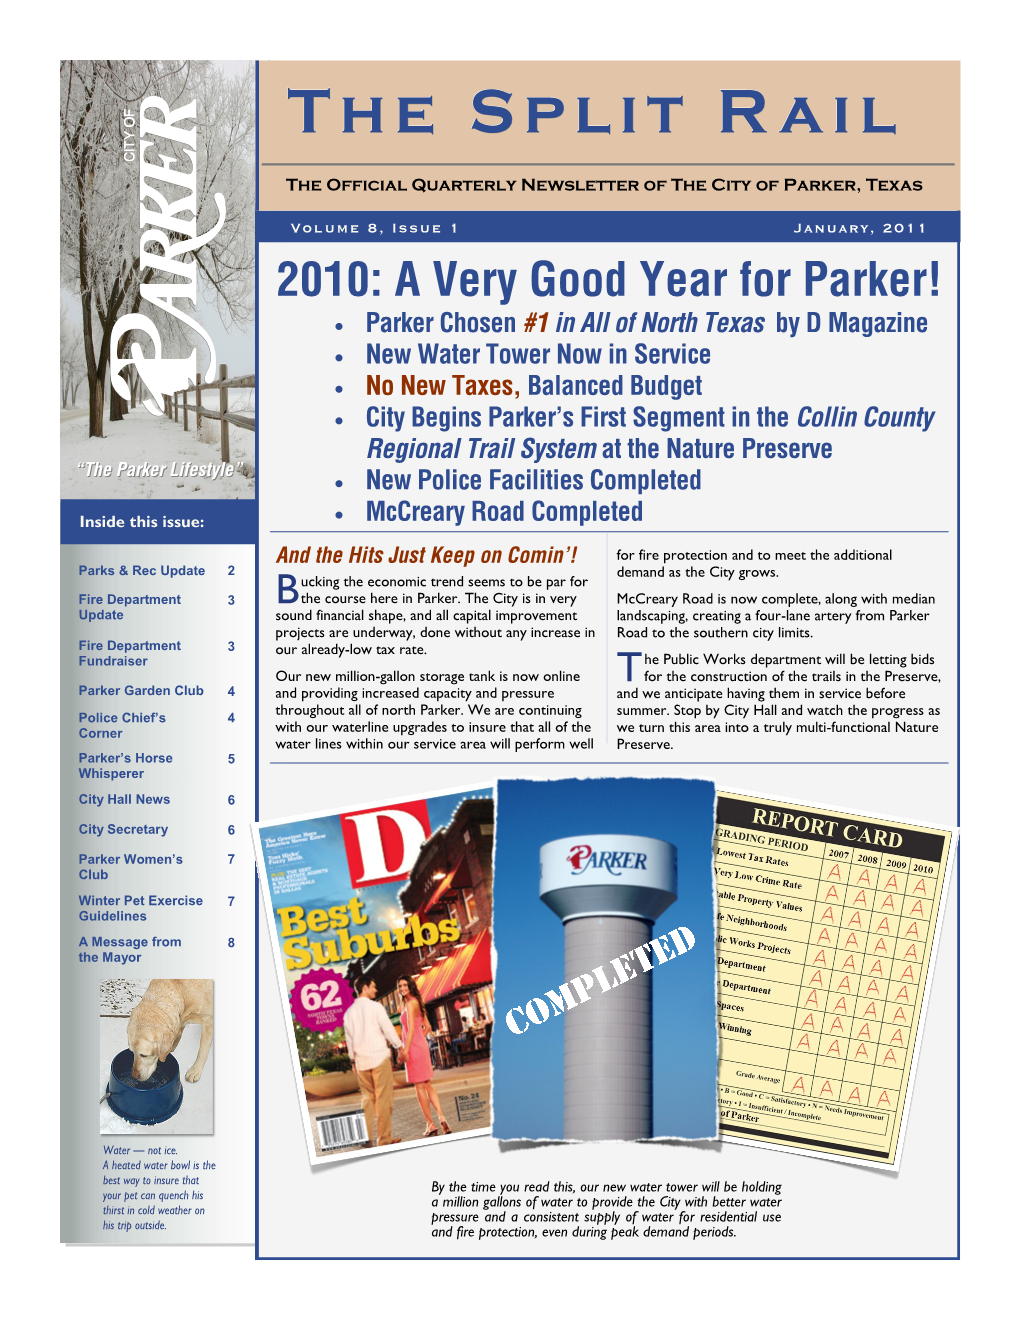 The Official Quarterly Newsletter of the City of Parker, Texas